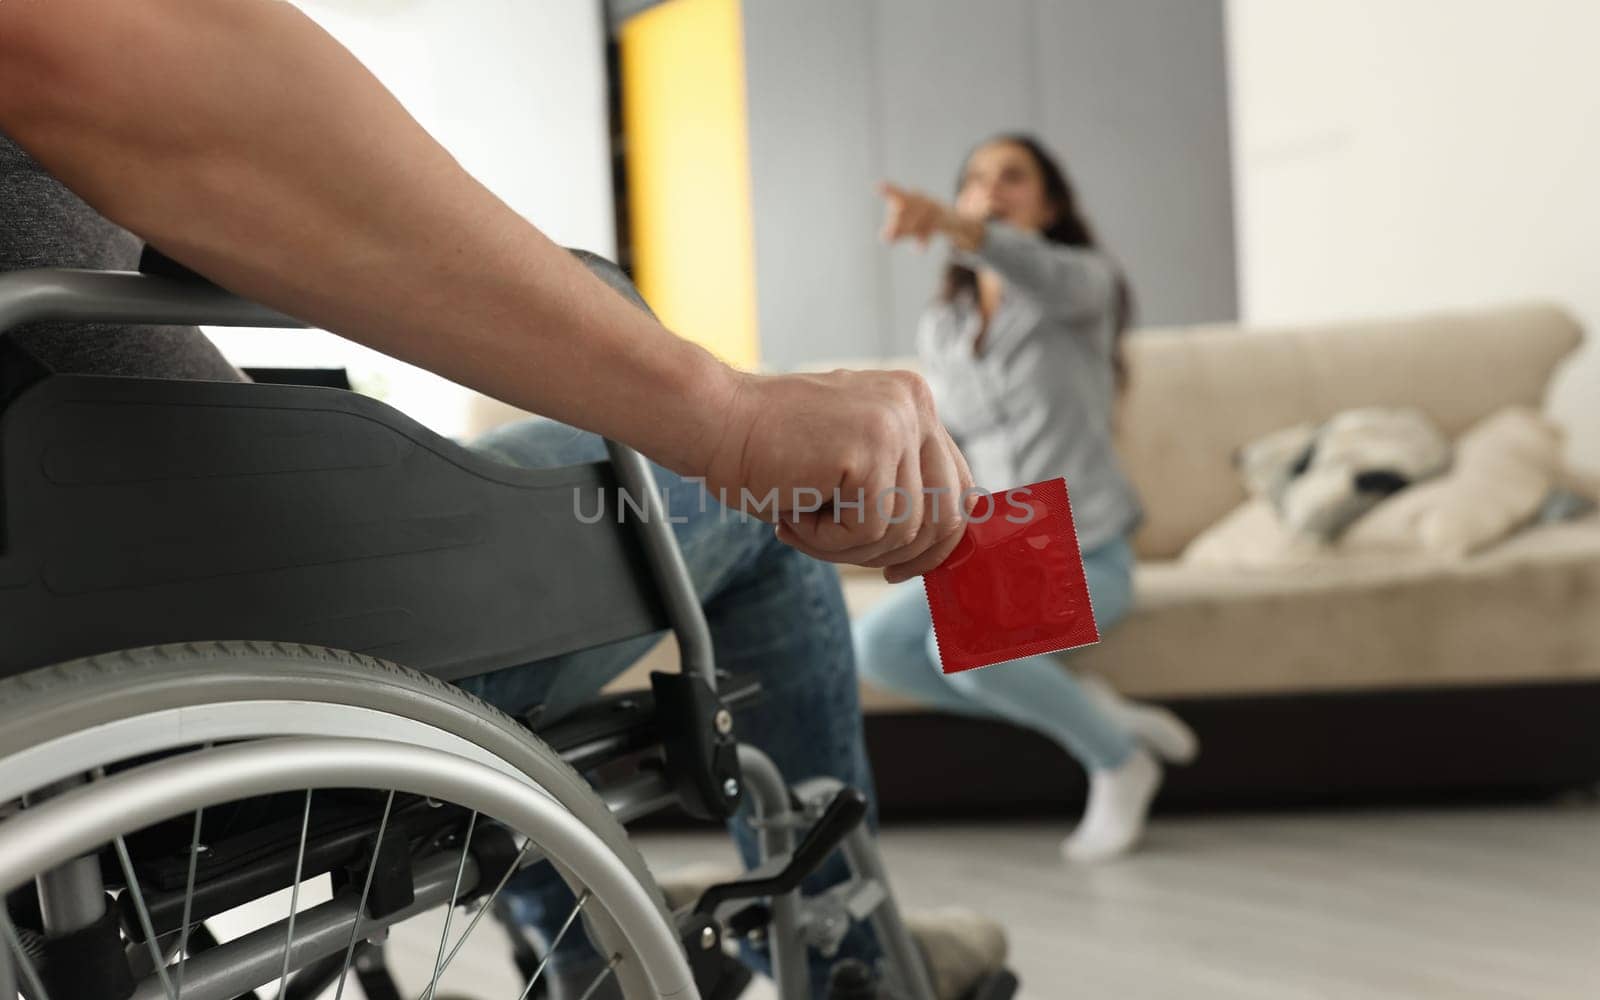 Woman sit on couch, point finger and laugh. Man in wheelchair hold red condom in his hand close up.